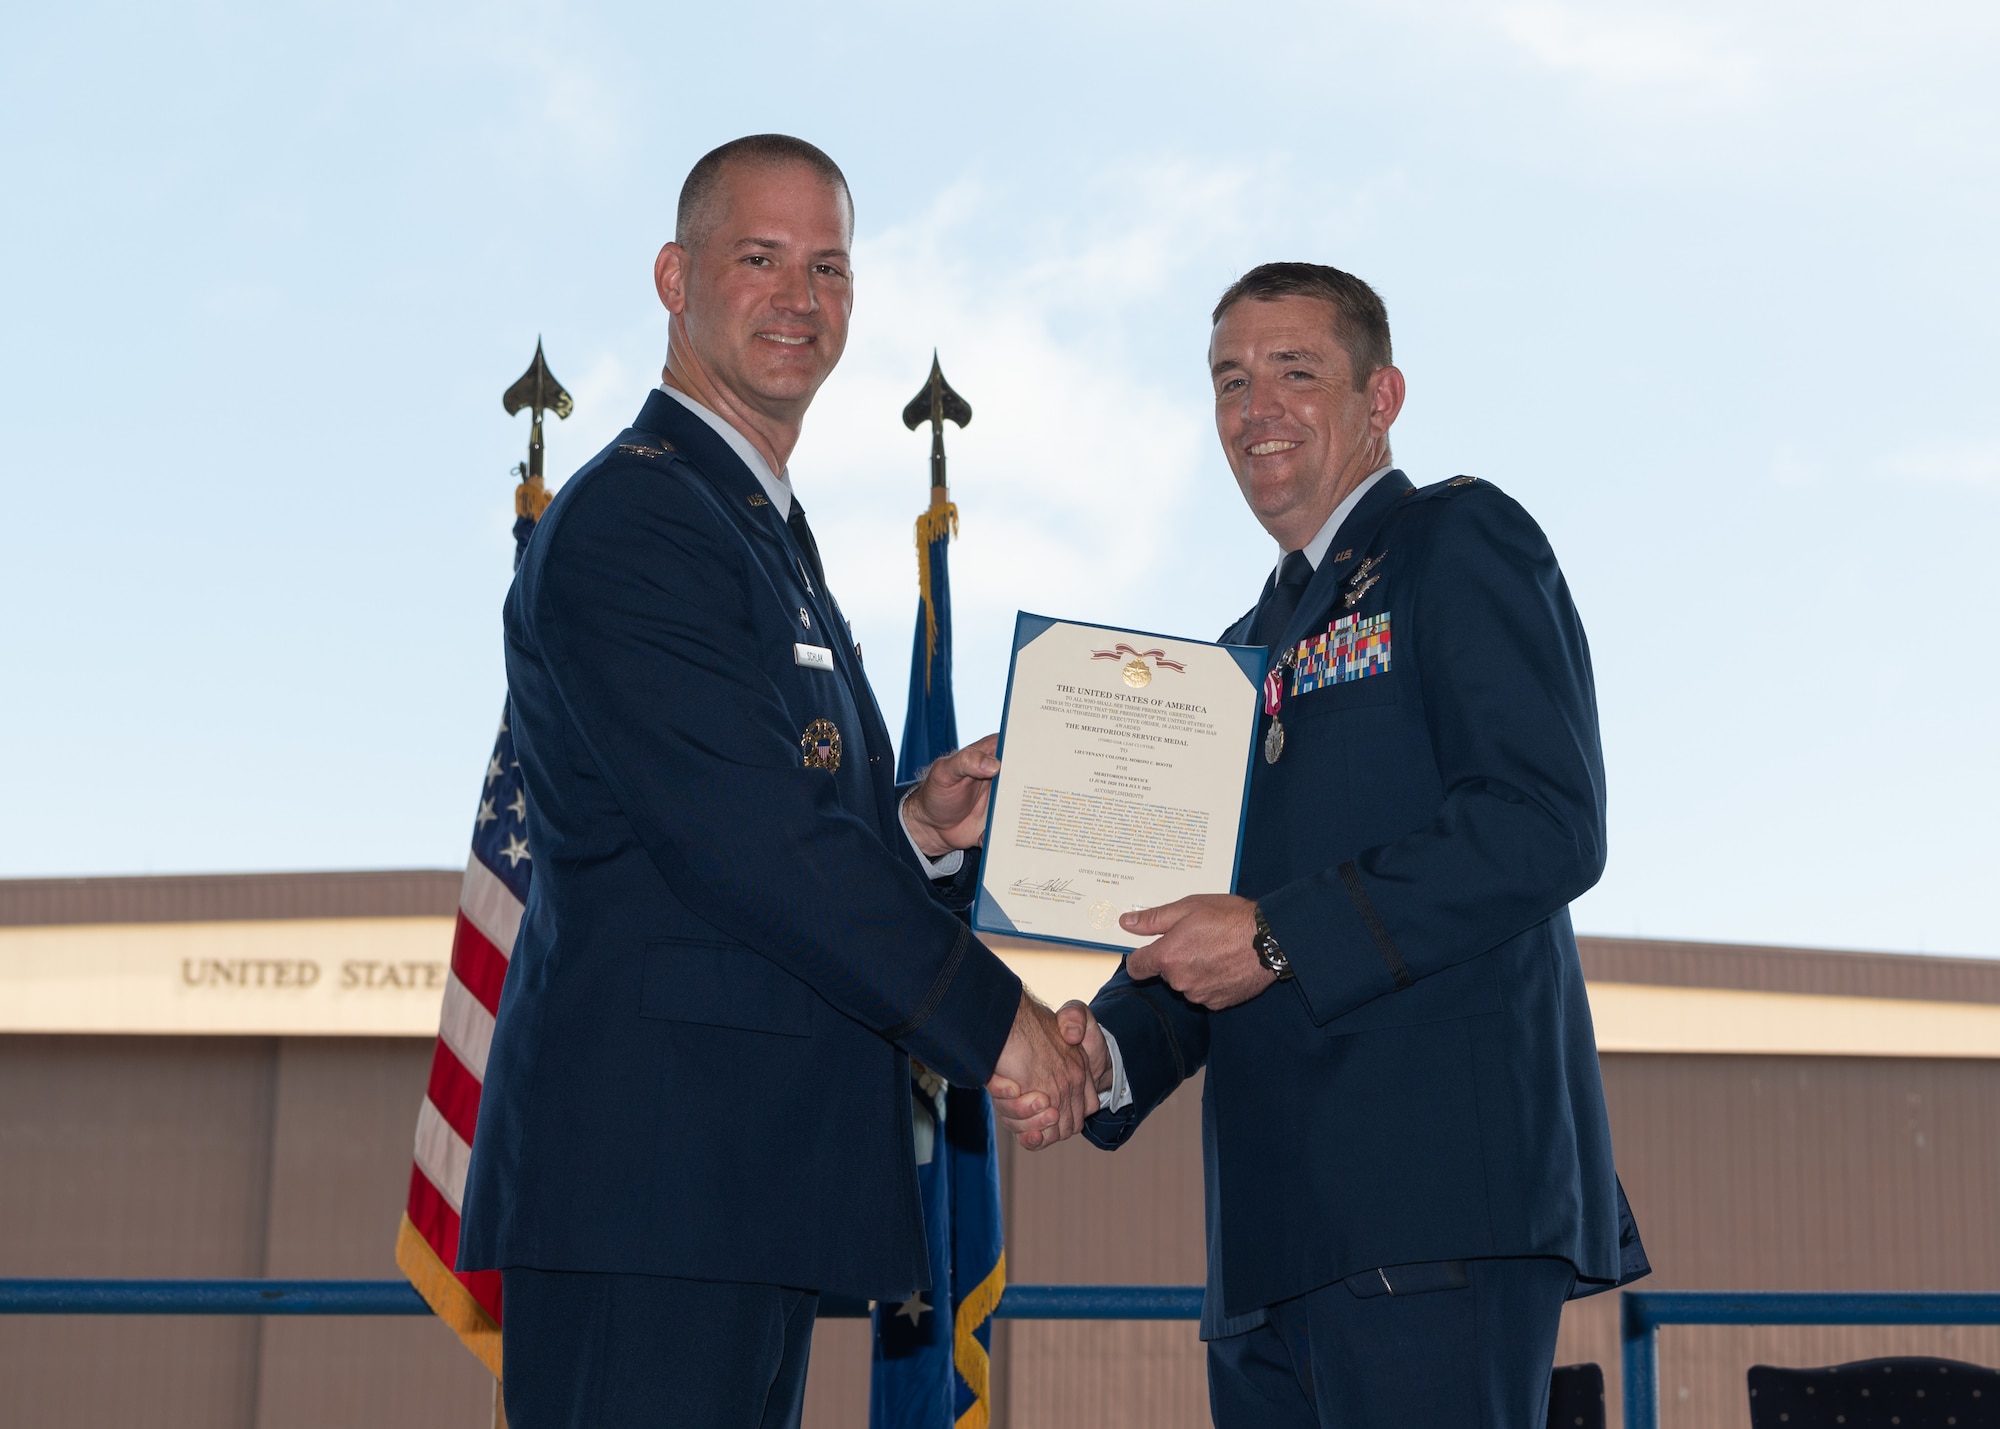 Lt. Col. M. Craig Booth receives the Meritorious Service Medal during the 509th Communications Squadron change of command.